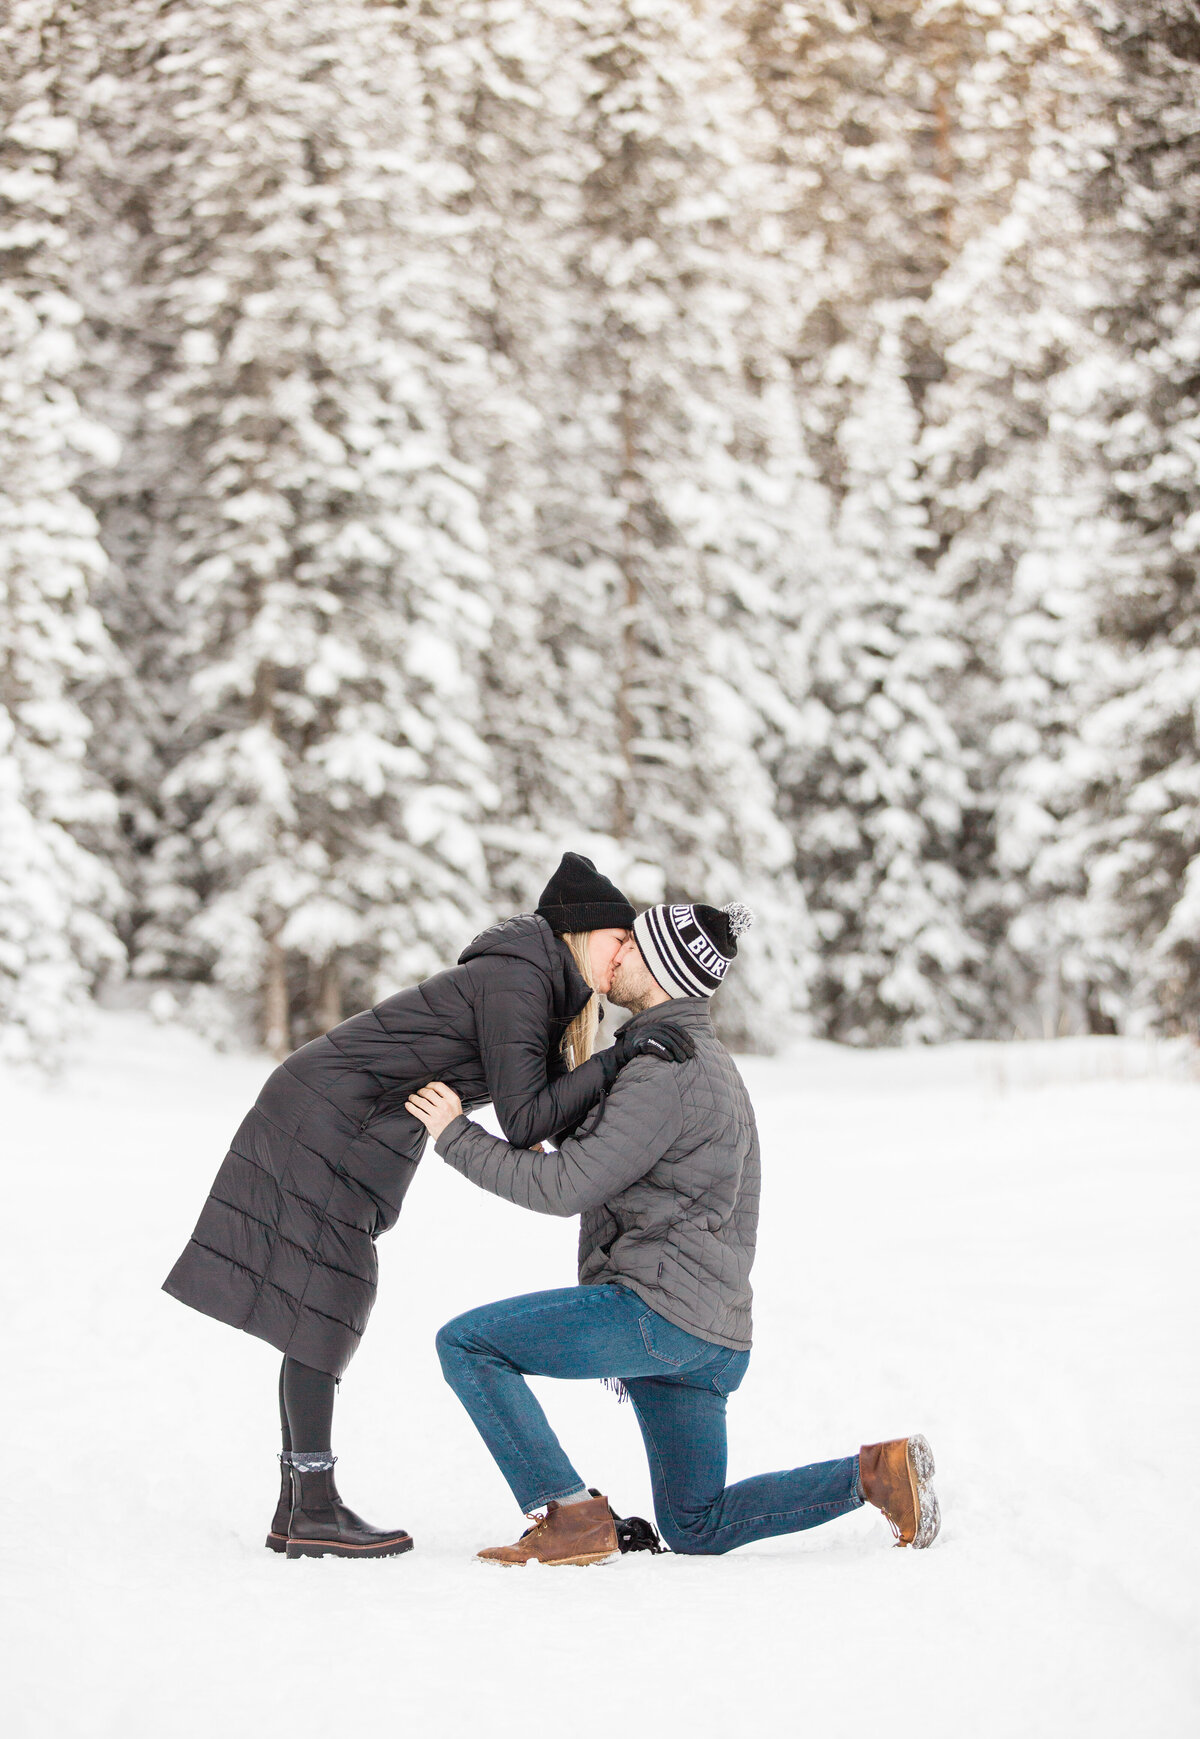 A woman knees down to kiss her fiance who has just asked her to marry him. They are in a gorgeous winter scene with snow covered pine trees